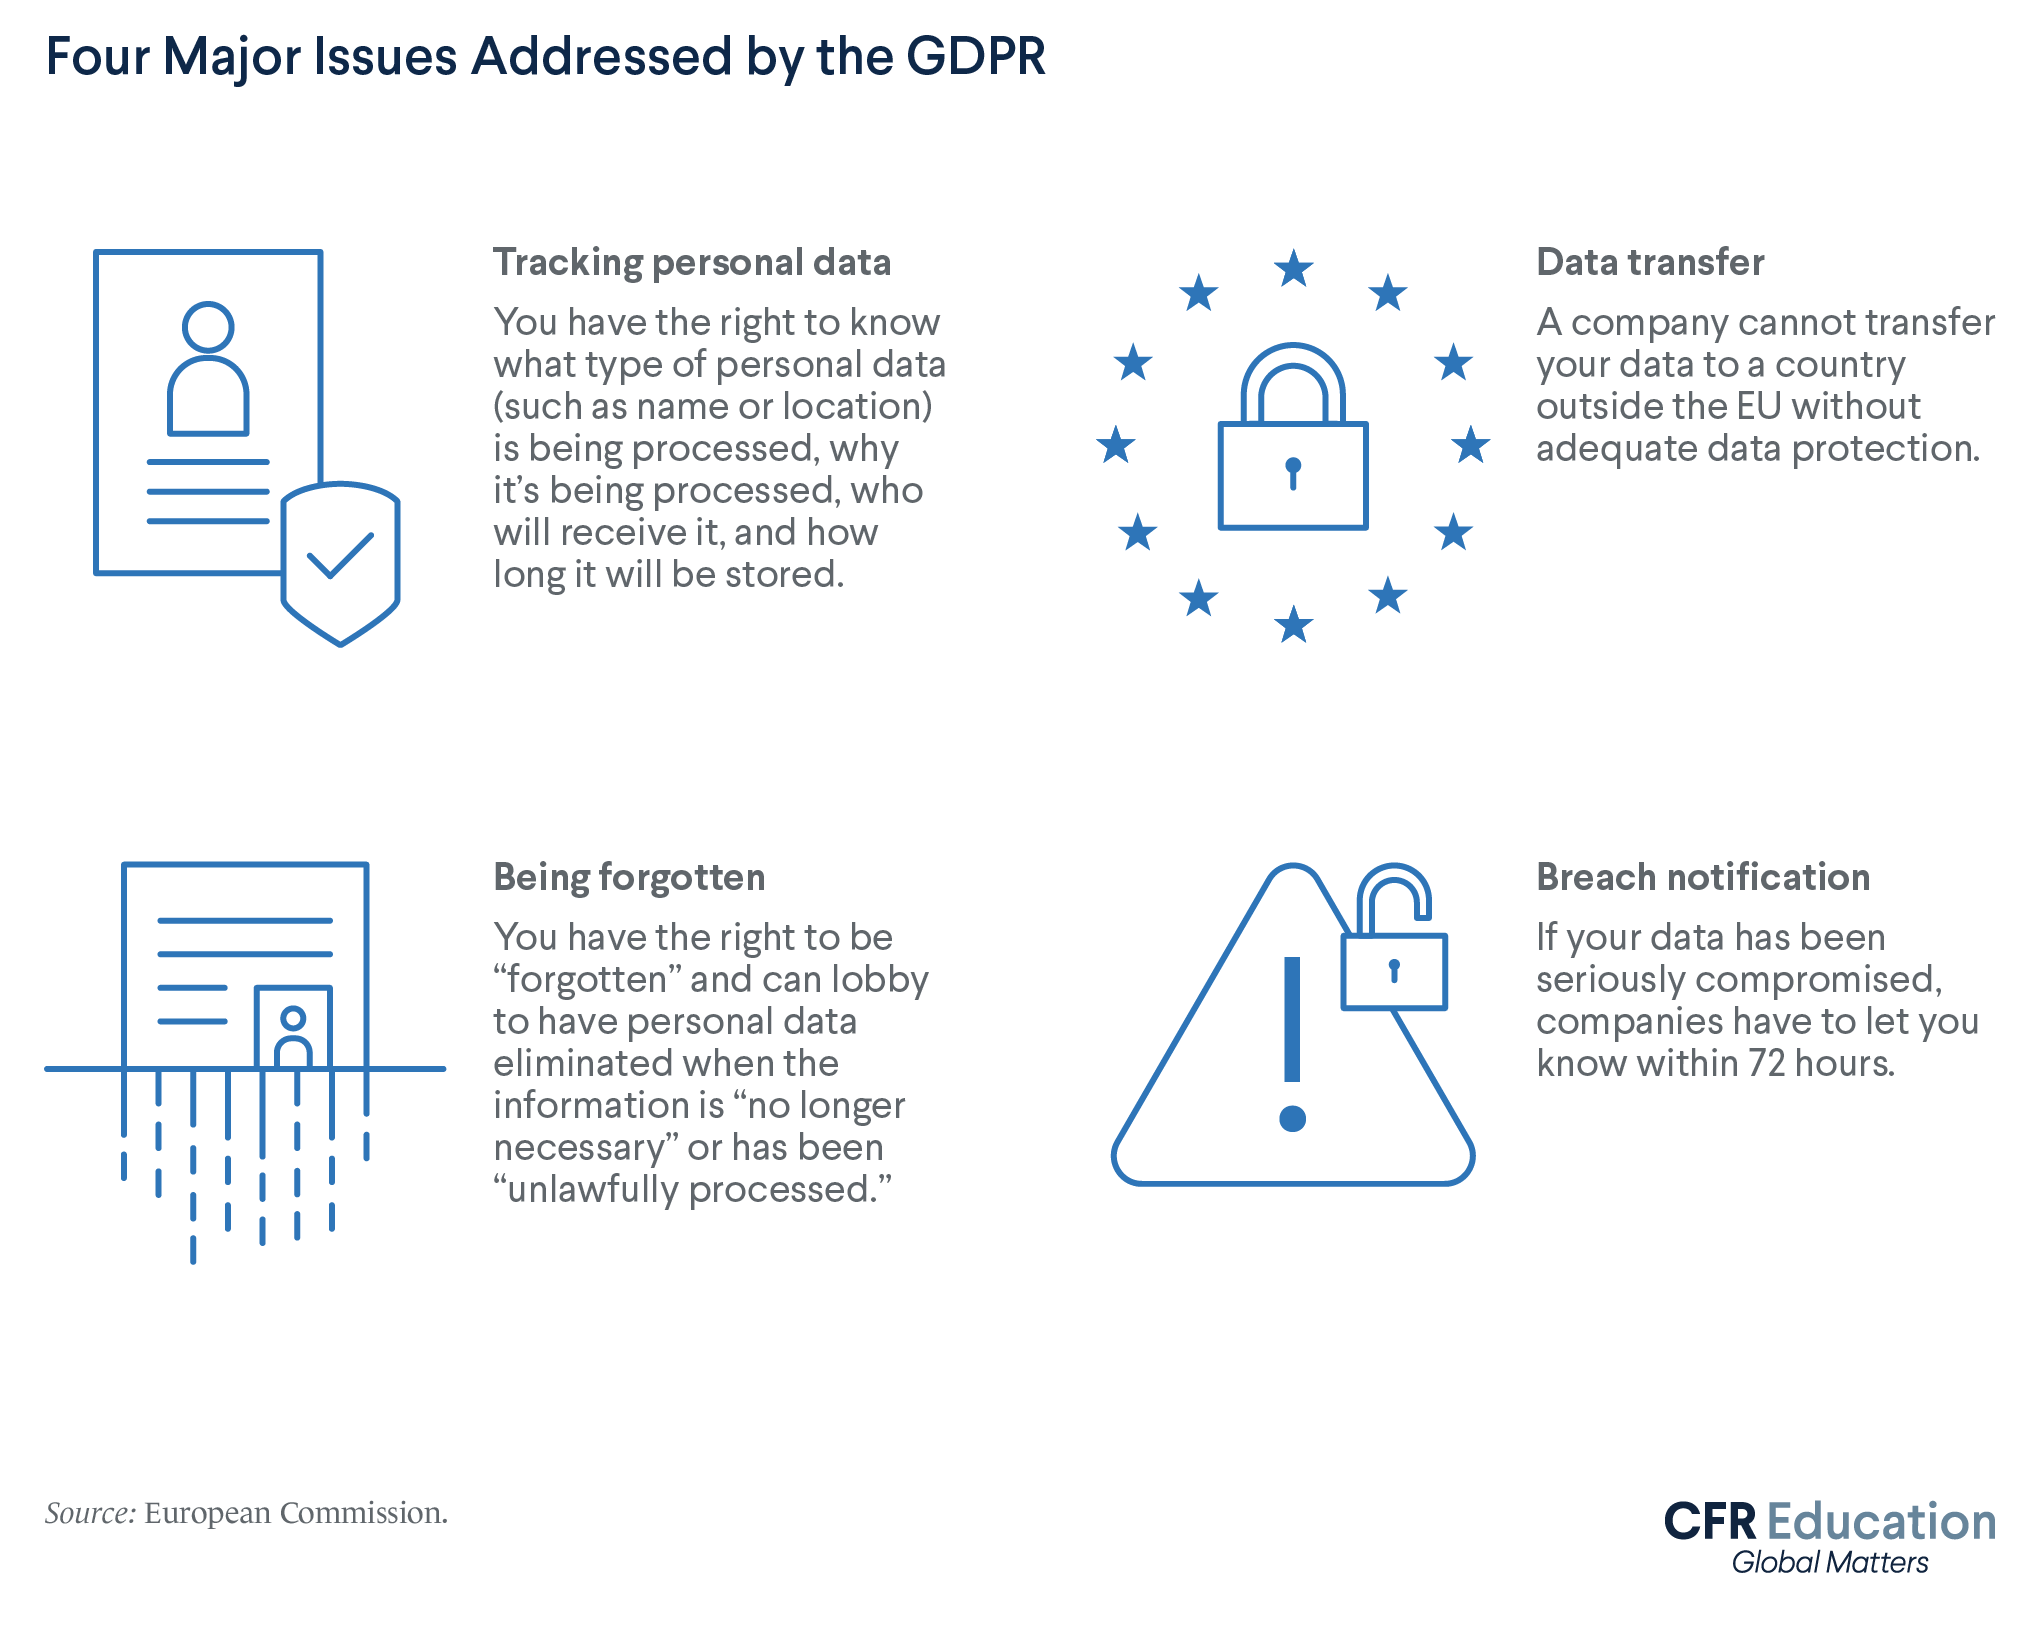 An infographic showing the four major issues addressed by the GDPR: the tracking of personal data, the transfer of data to countries outside of the EU, the right to be forgotten, and breach notifications. For more info contact us at  cfr_education@cfr.org